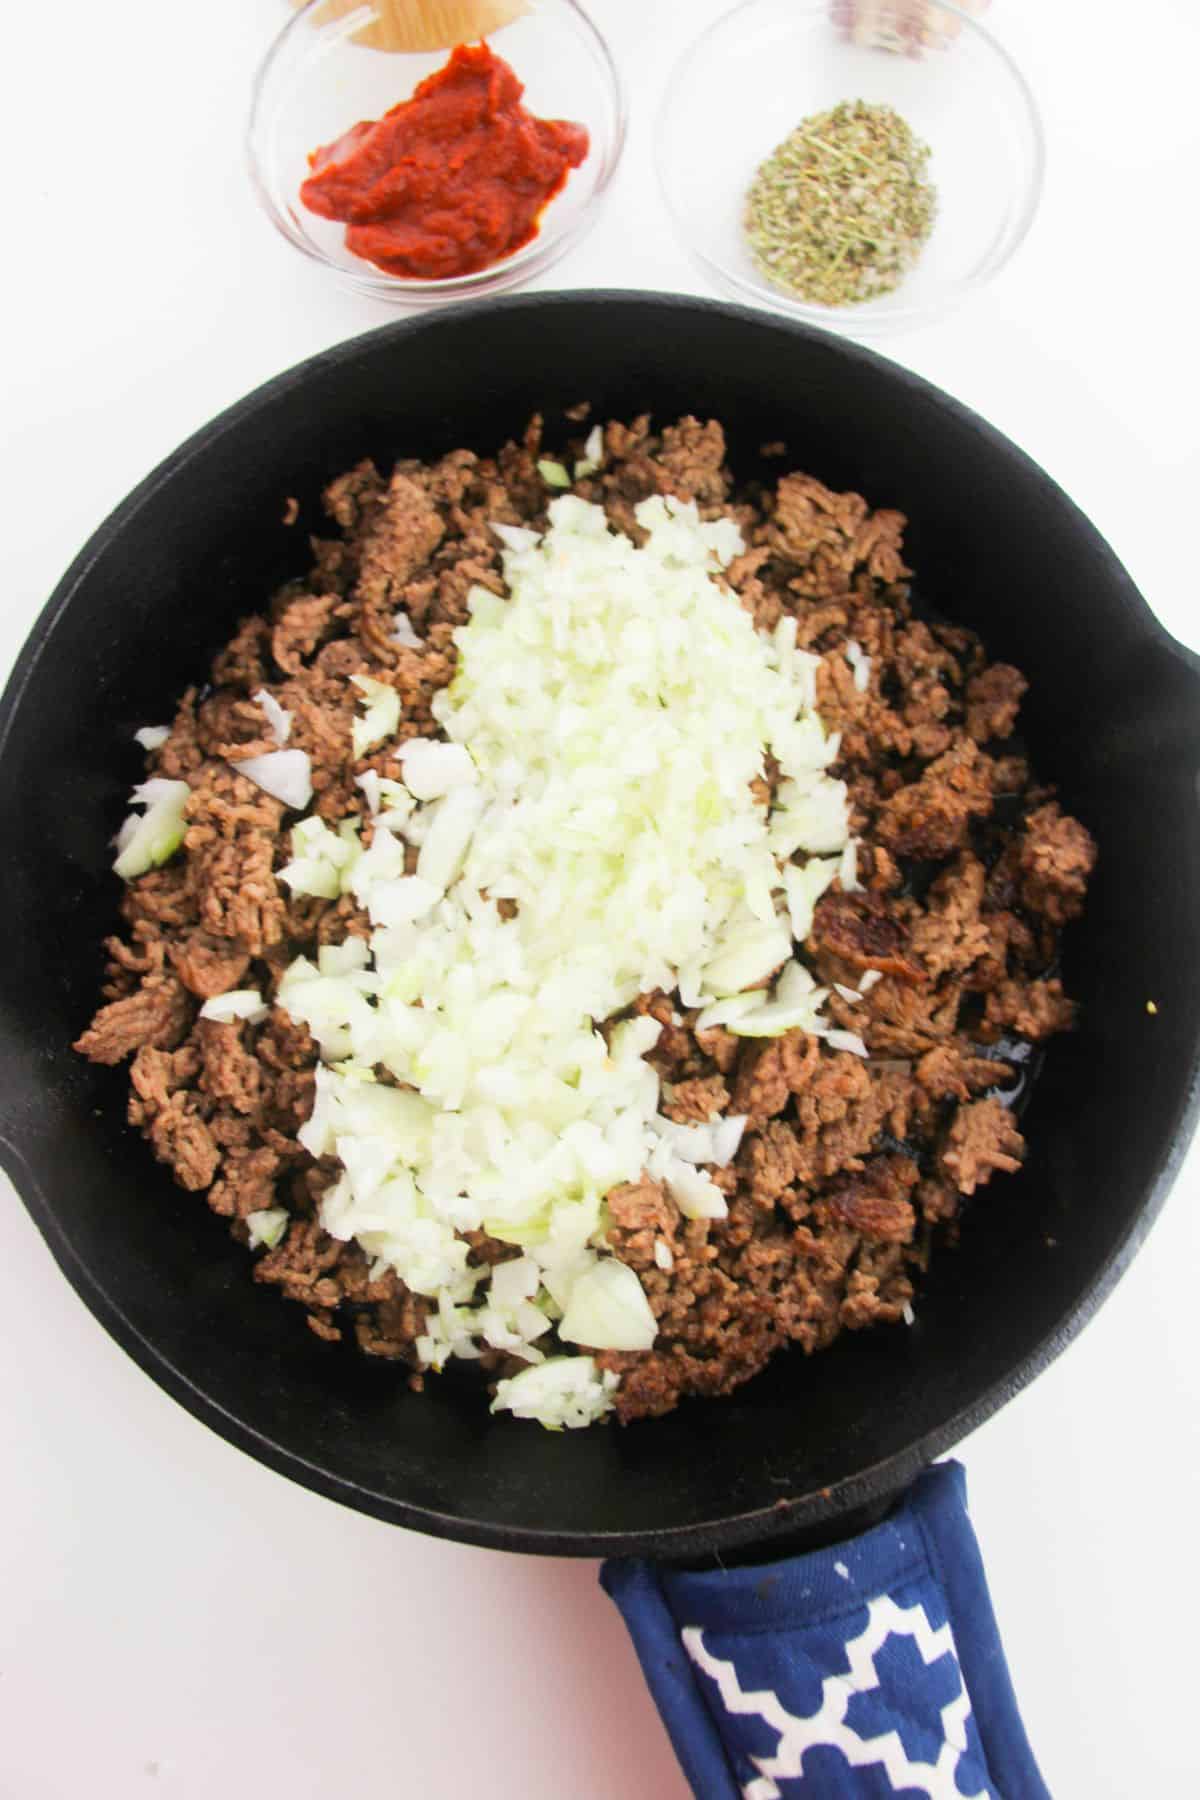 Onions are added in a large skillet with ground beef.